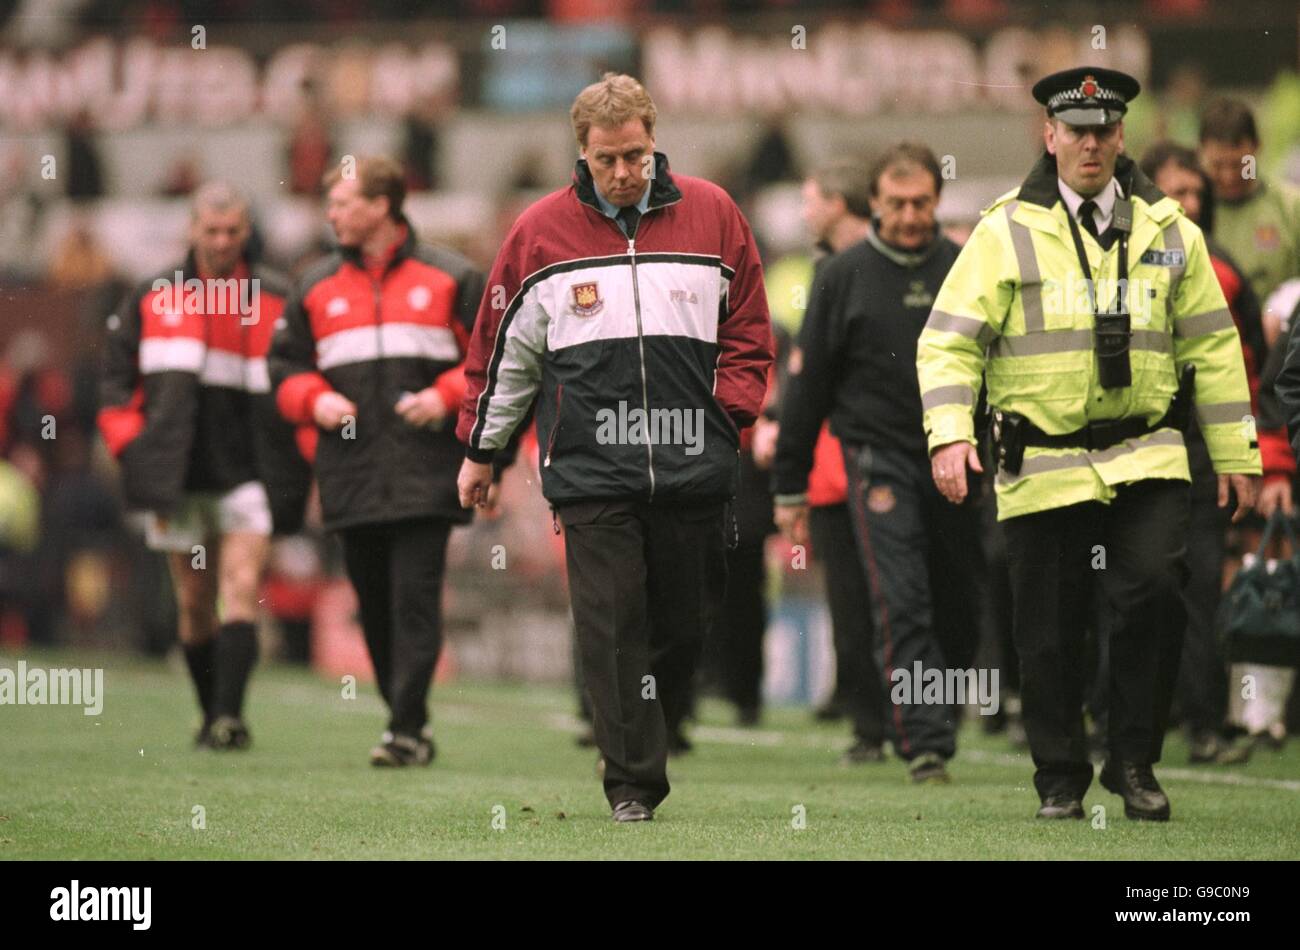 Soccer - FA Carling Premiership - Manchester United v West Ham United. West Ham United manager Harry Redknapp trudges off after seeing his team lose 7-1 Stock Photo